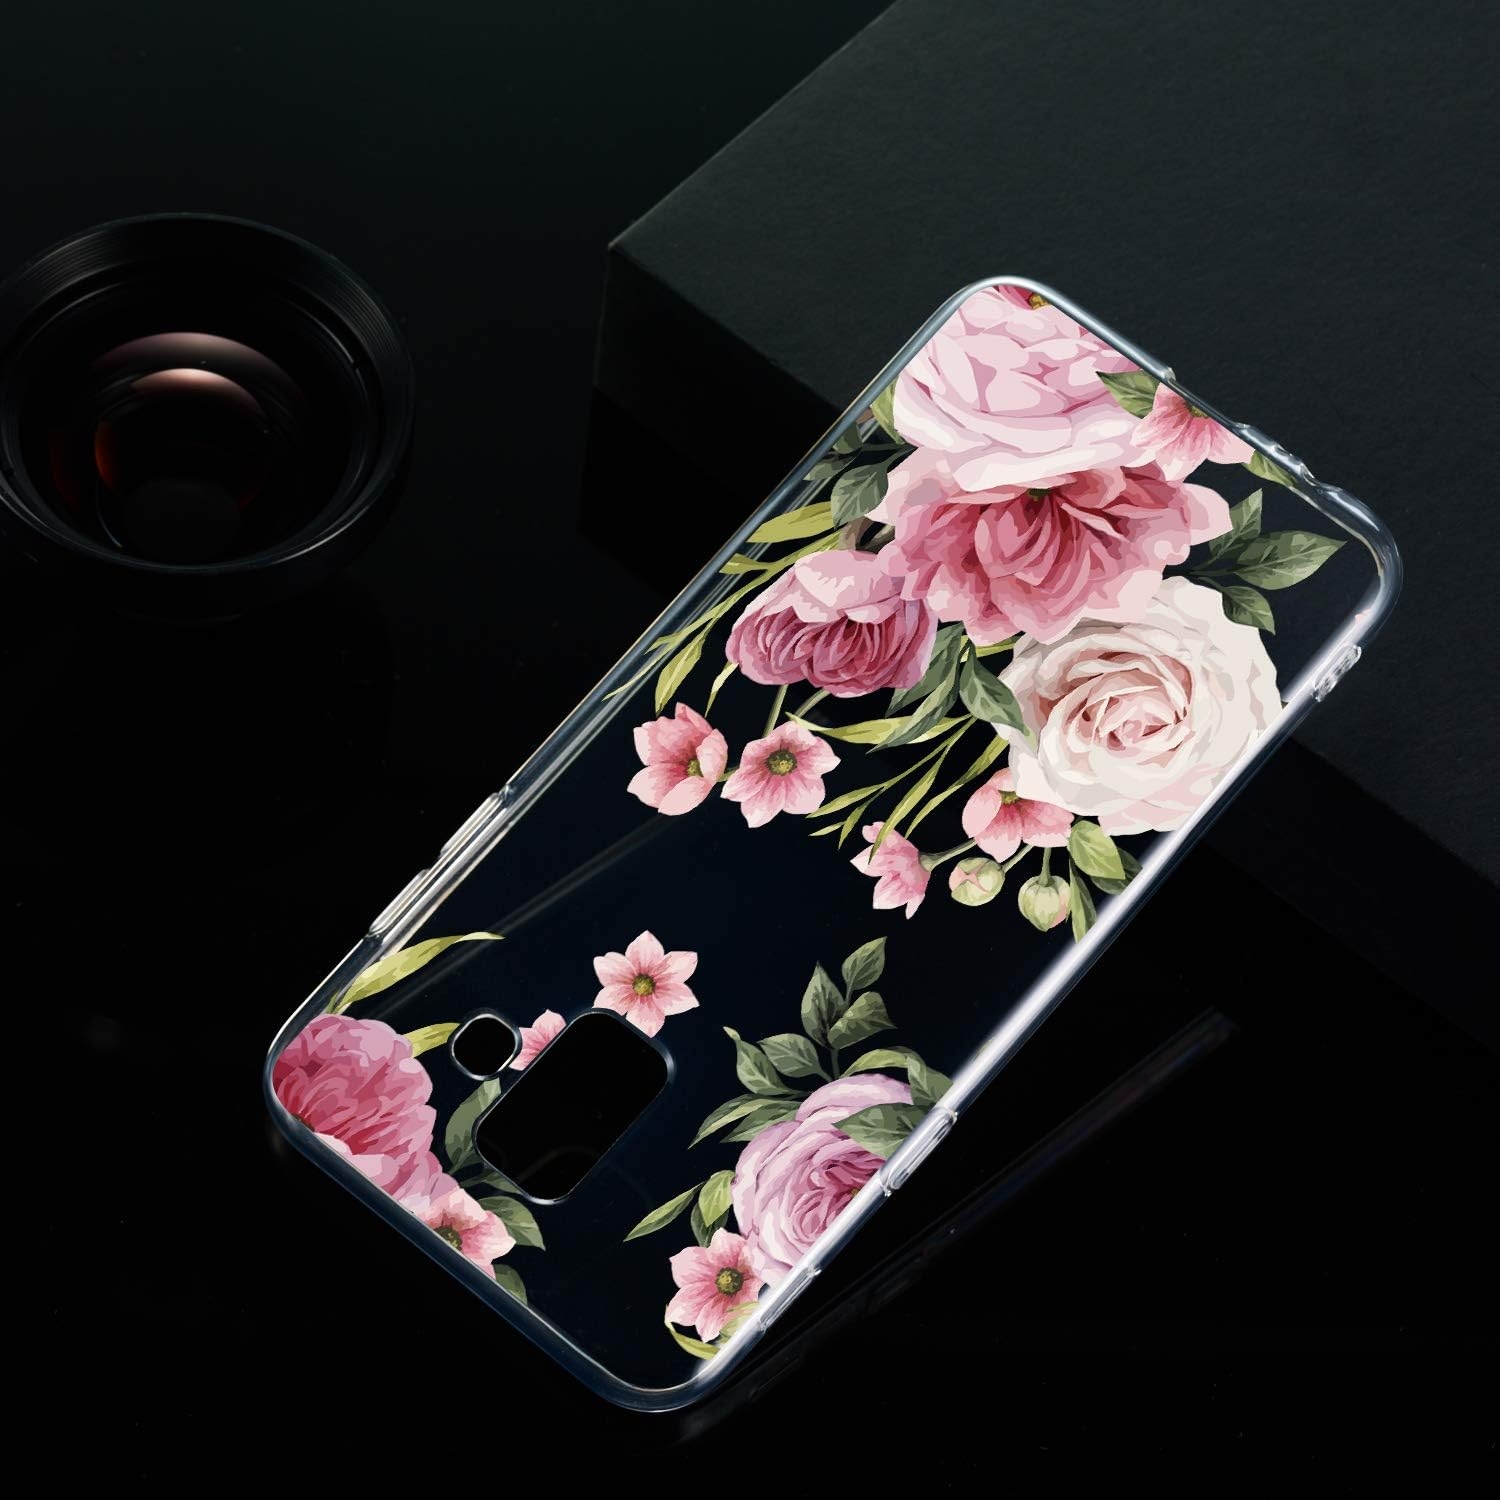 Amocase Cute Floral Case with 2 in 1 Stylus for Samsung Galaxy A6 Plus 2018,Stylish Ultra Thin Sweet Flowers Soft Rubber Silicone TPU Shockproof Anti-Scratch Flexible Clear Case - Pink Rose